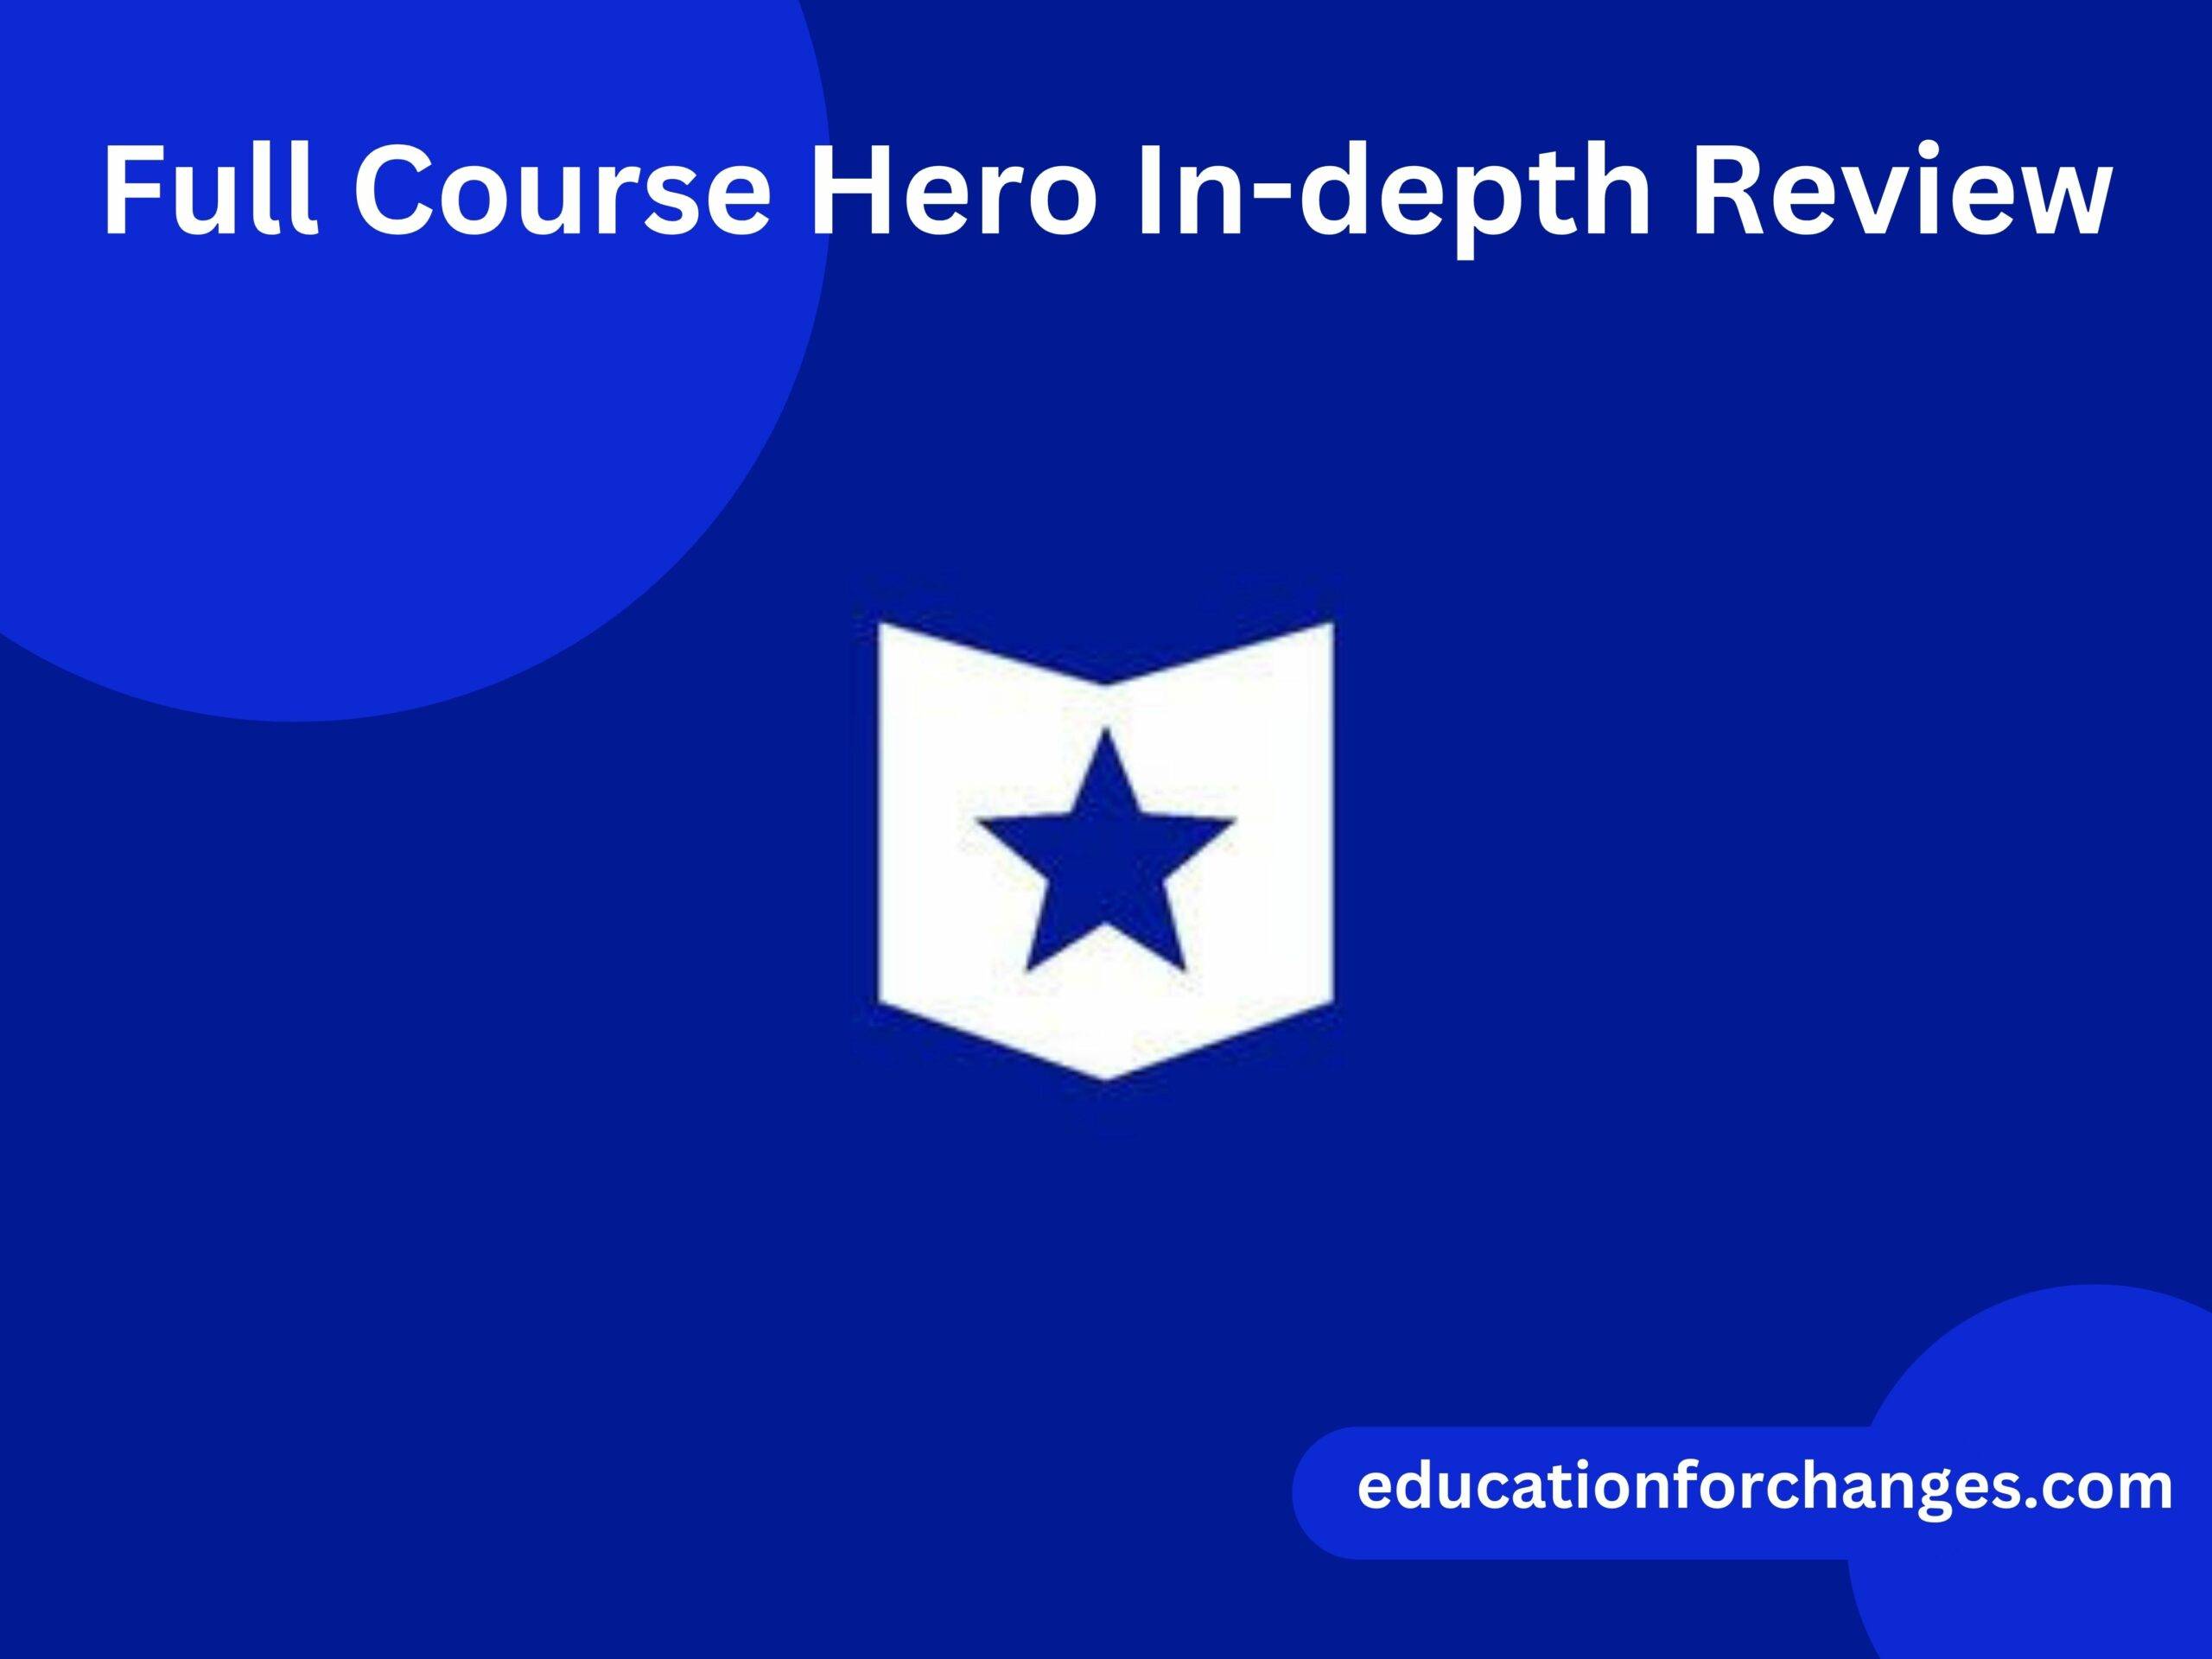 Full Course Hero In-depth Review